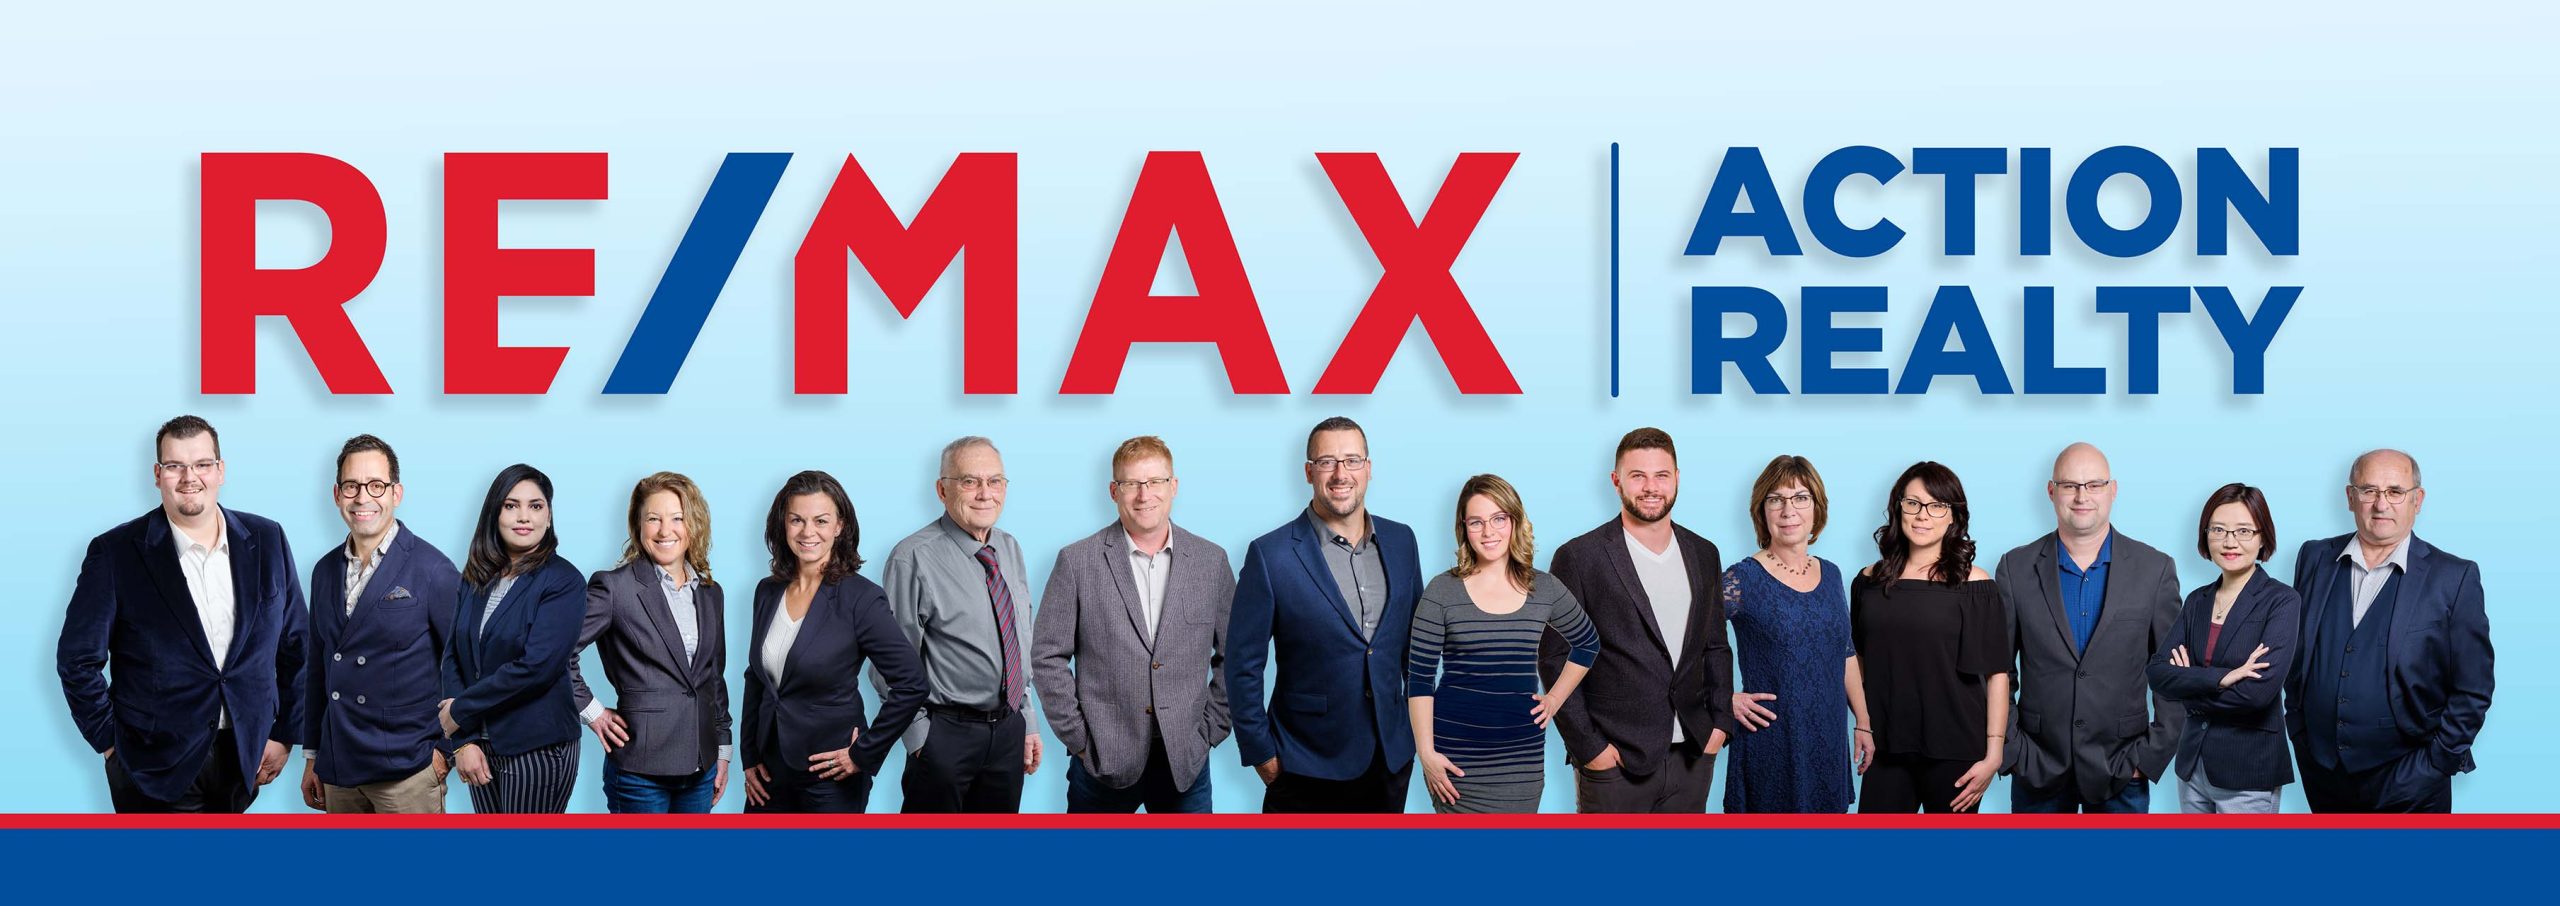 REMAX Action Realty April 2022